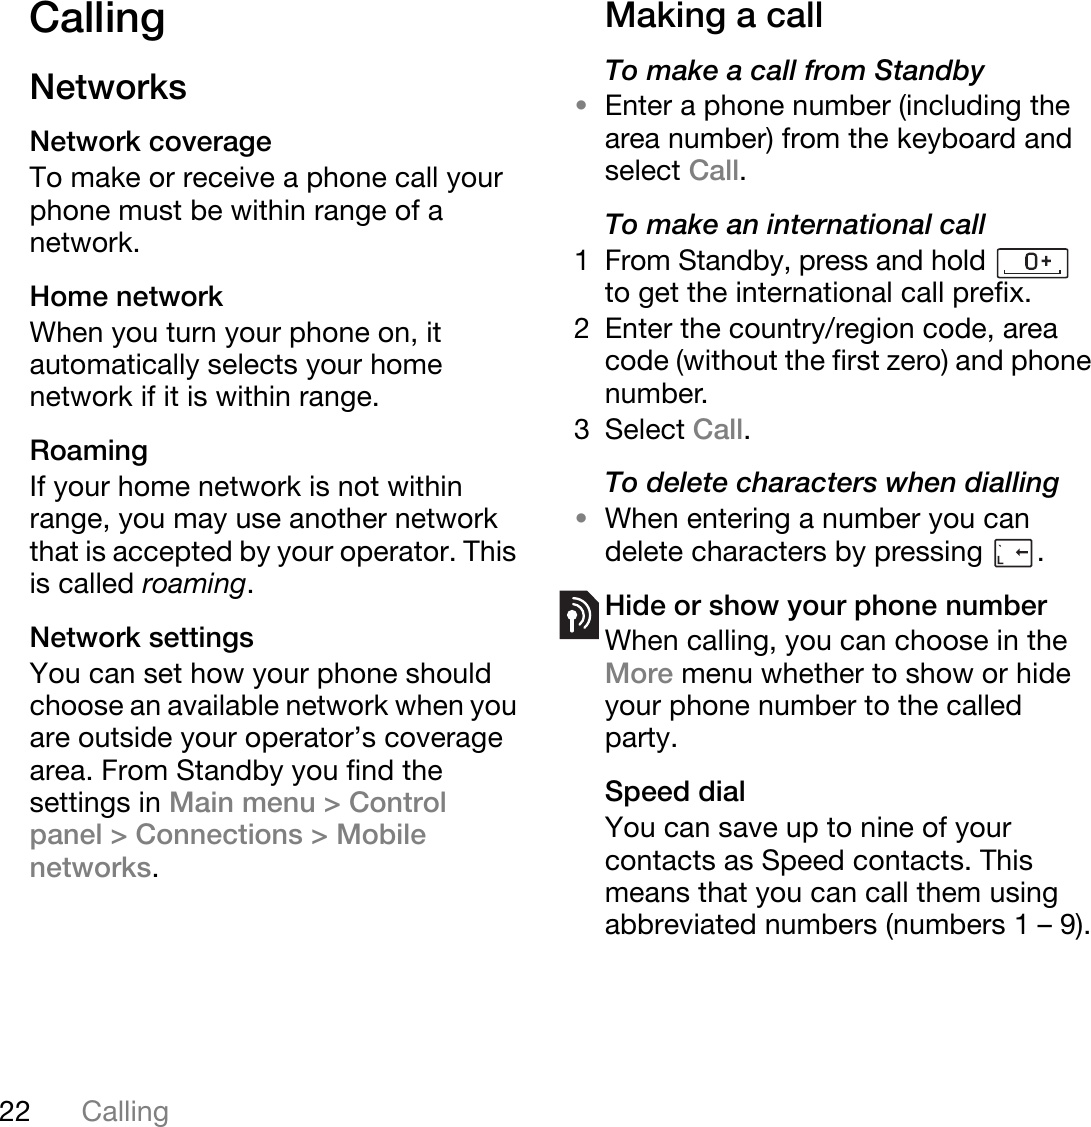 22 CallingThis is the Internet version of the user&apos;s guide. © Print only for private use.CallingNetworksNetwork coverageTo make or receive a phone call your phone must be within range of a network.Home networkWhen you turn your phone on, it automatically selects your home network if it is within range.RoamingIf your home network is not within range, you may use another network that is accepted by your operator. This is called roaming.Network settingsYou can set how your phone should choose an available network when you are outside your operator’s coverage area. From Standby you find the settings in Main menu &gt; Control panel &gt; Connections &gt; Mobile networks.Making a callTo make a call from Standby•Enter a phone number (including the area number) from the keyboard and select Call.To make an international call1 From Standby, press and hold   to get the international call prefix.2 Enter the country/region code, area code (without the first zero) and phone number.3Select Call.To delete characters when dialling•When entering a number you can delete characters by pressing  .Hide or show your phone numberWhen calling, you can choose in the More menu whether to show or hide your phone number to the called party.Speed dialYou can save up to nine of your contacts as Speed contacts. This means that you can call them using abbreviated numbers (numbers 1 – 9).